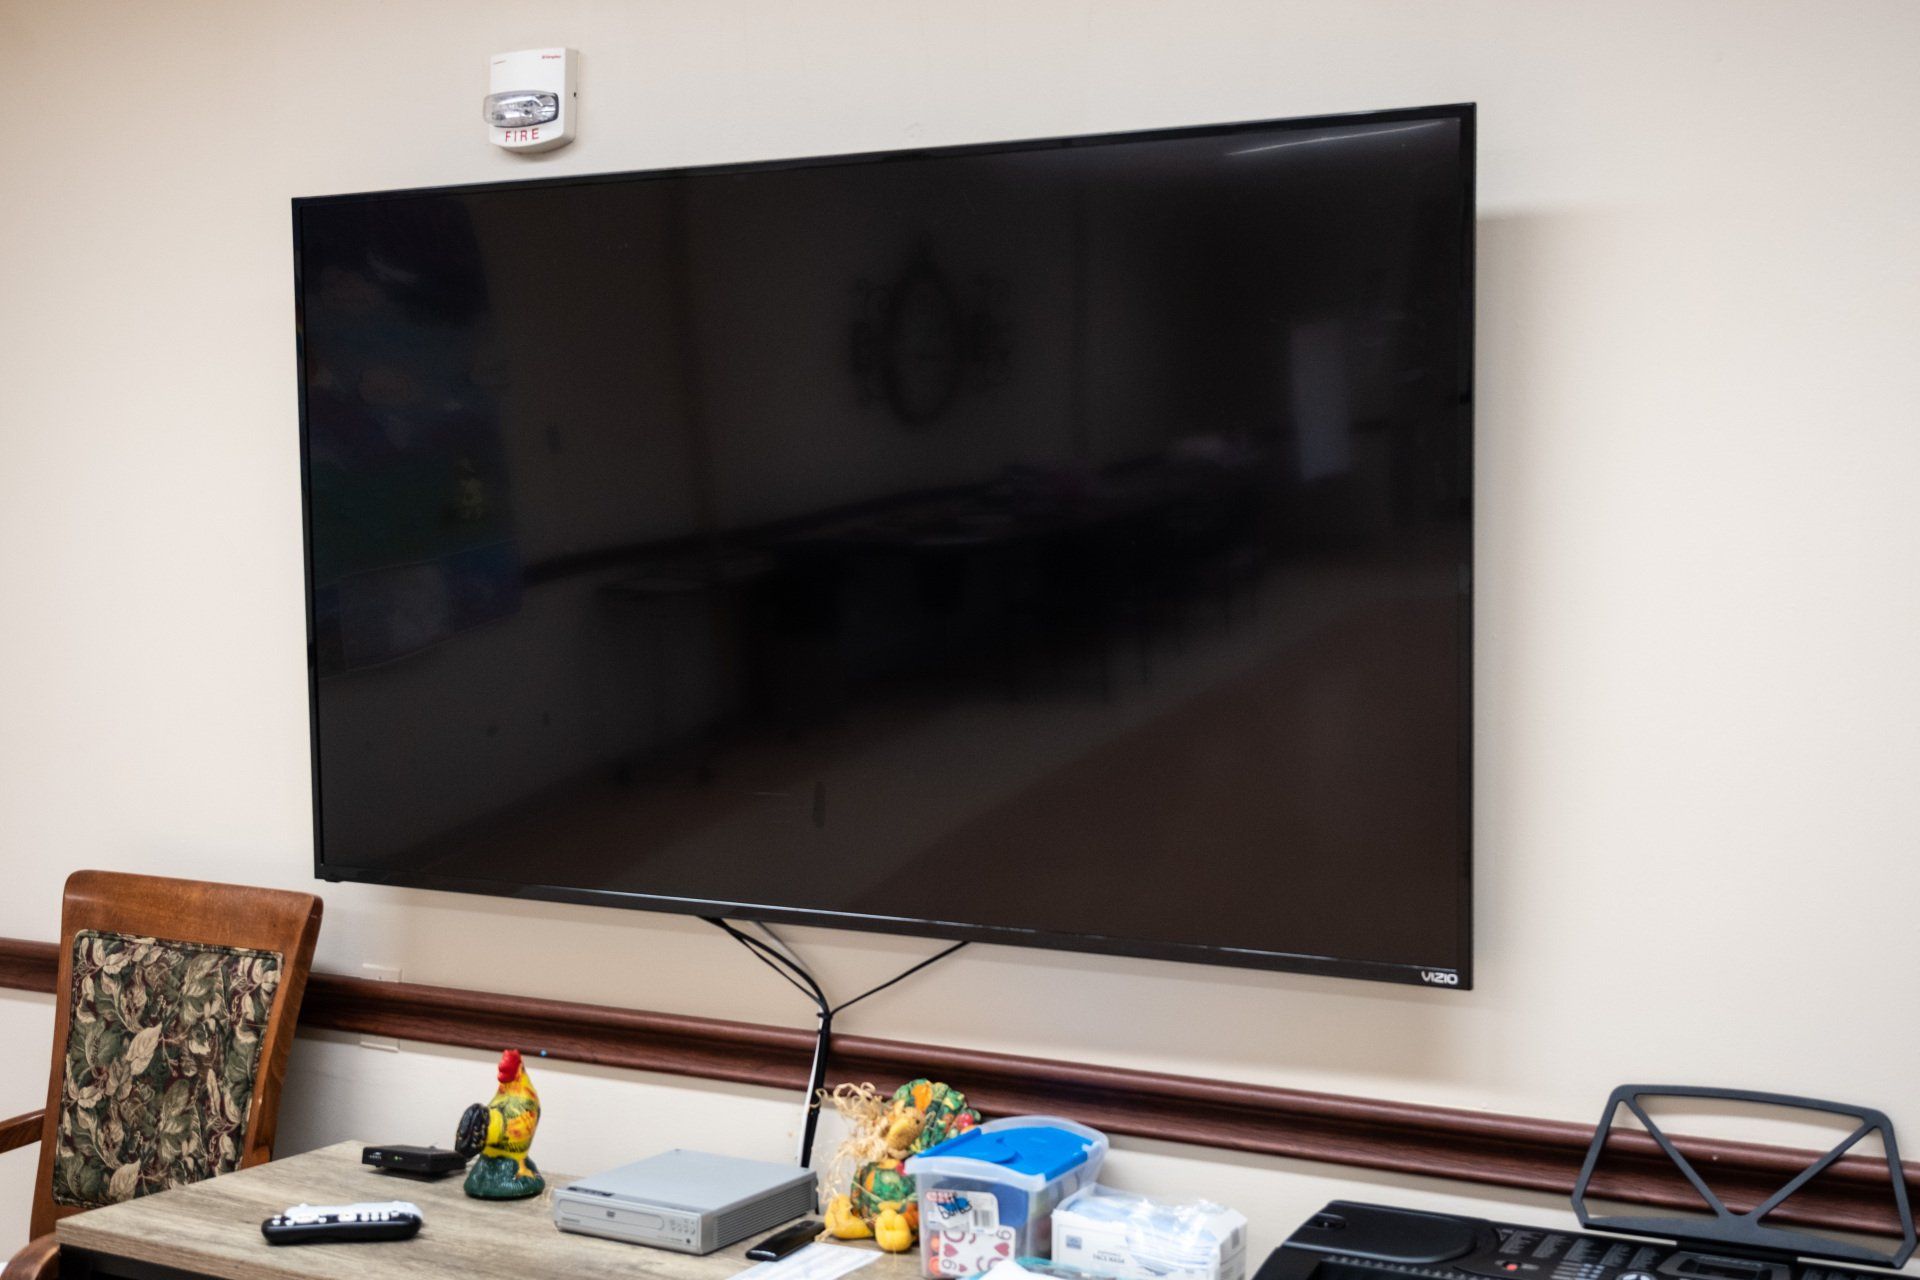 TV with Free Cable at Lenawee Medical Care Facility in Adrian, MI